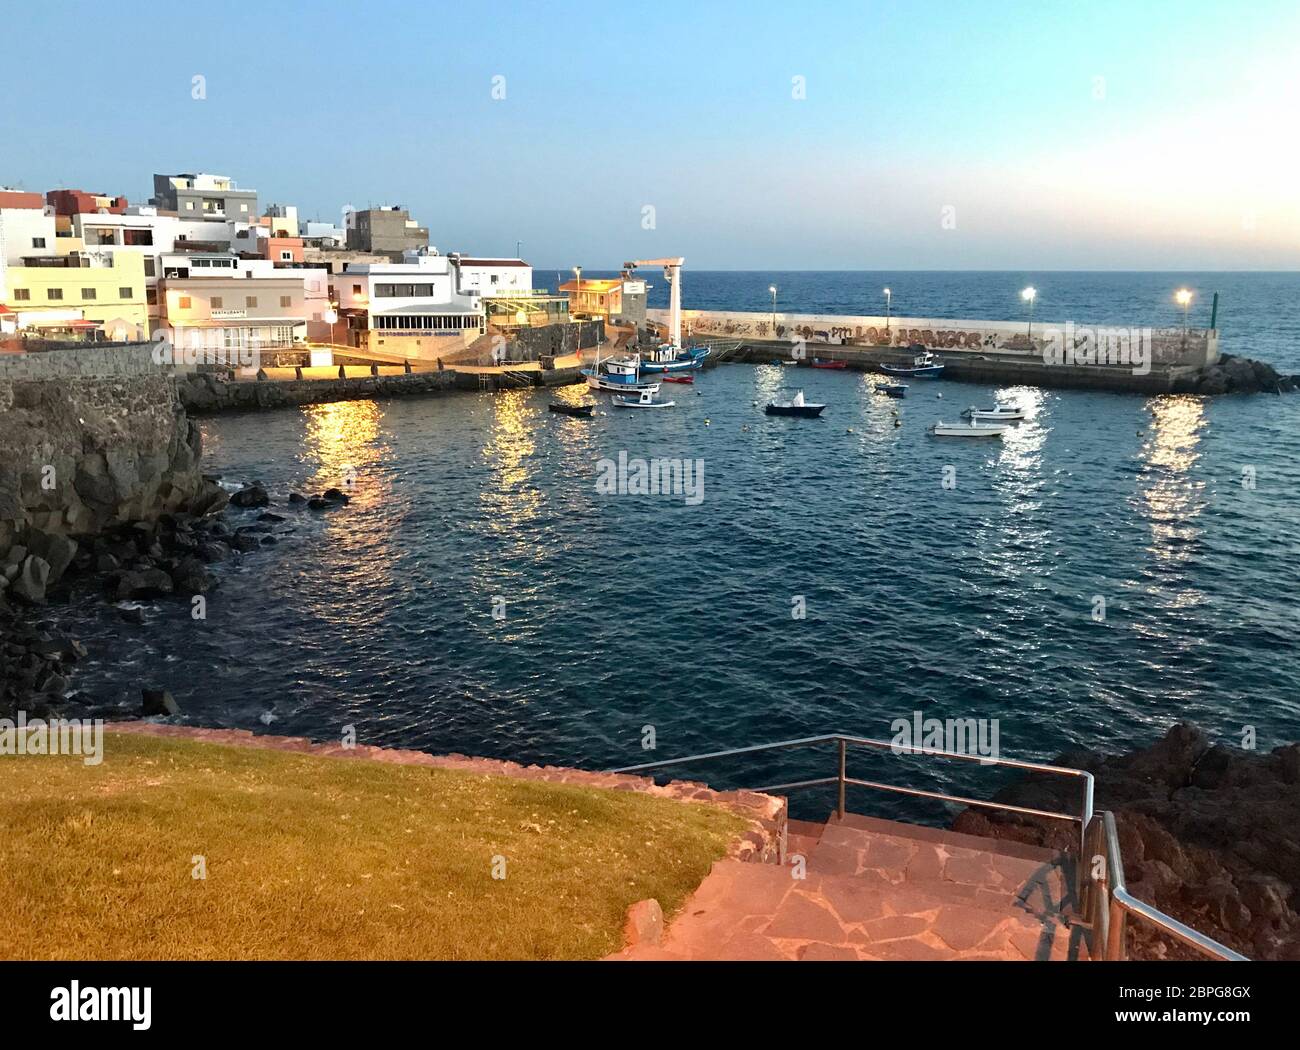 Los Abrigos, Tenerife, Spain -31 December,2019. Beautiful view on a small Port in Los Abrigos in the evening time, Tenerife, Gran canaria, Spain Stock Photo